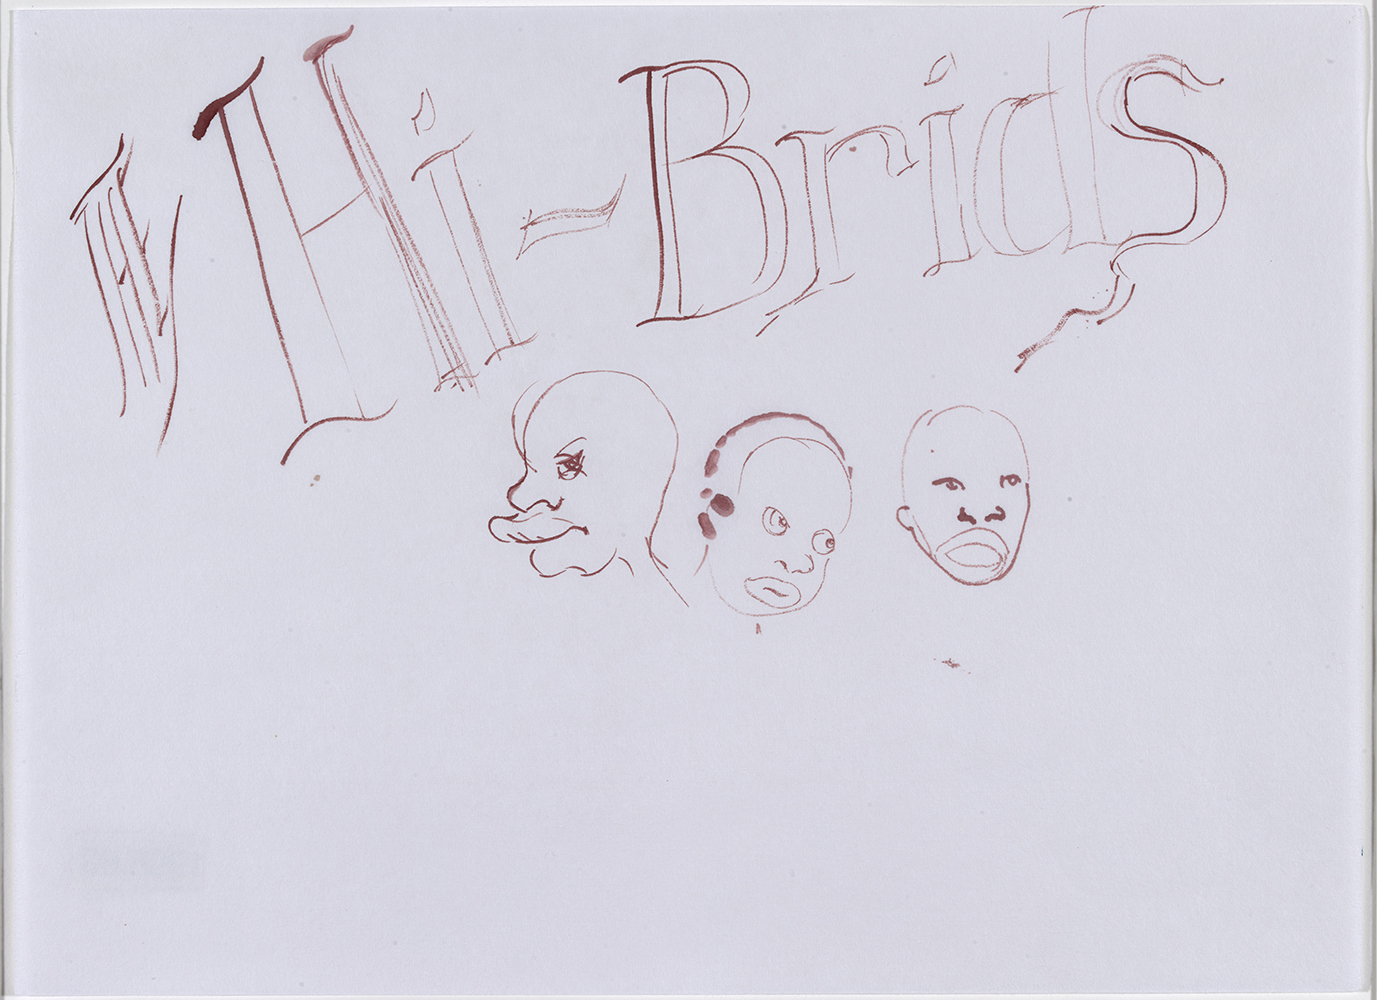 Gouache drawing with the title “The Hi-Brids” written at the with three figures of African descent pictured below with broad noses and big lips